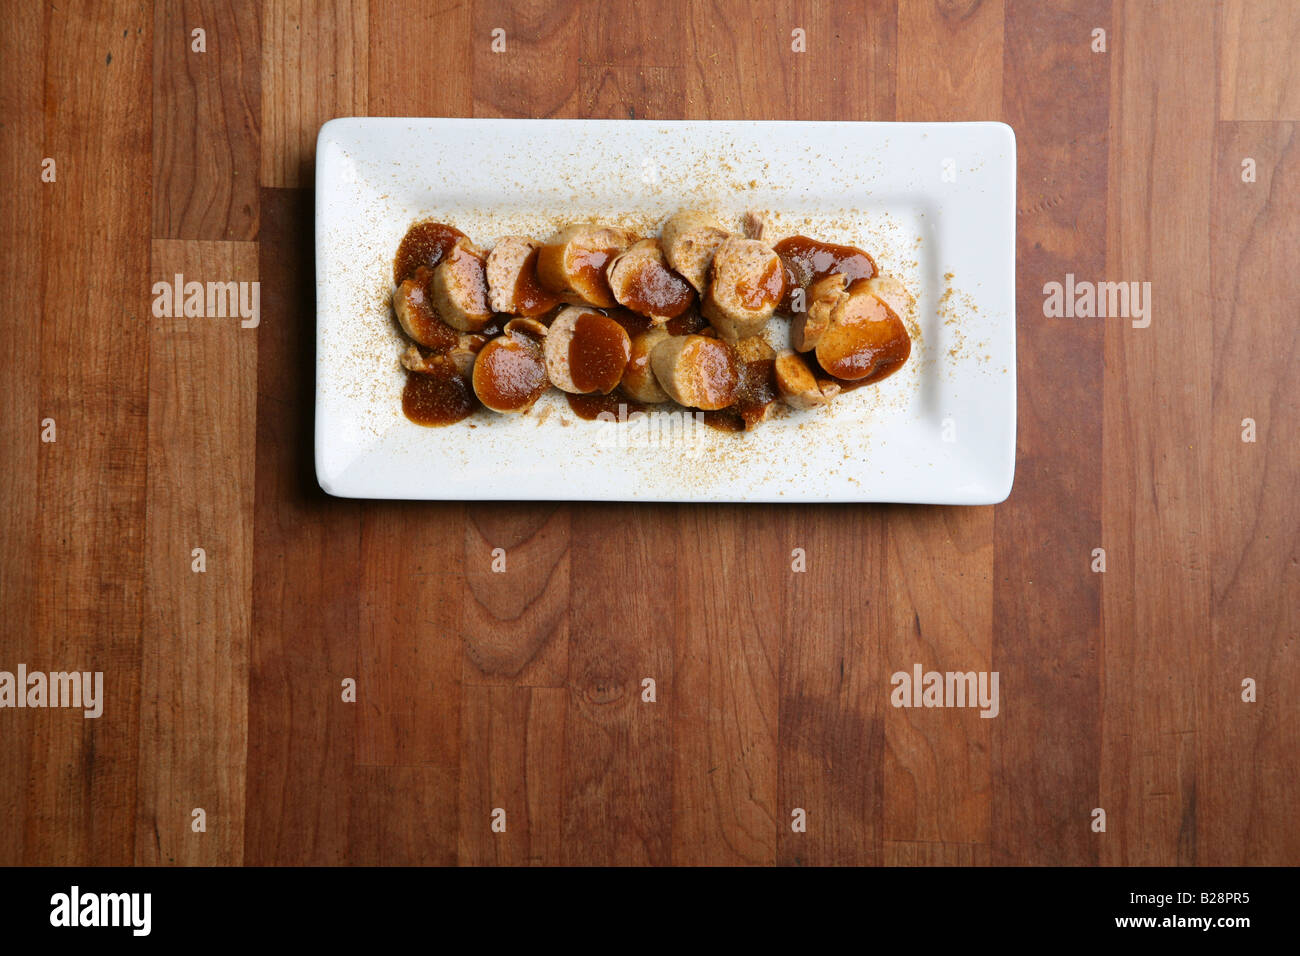 Currywurst german sausage on a plate Stock Photo